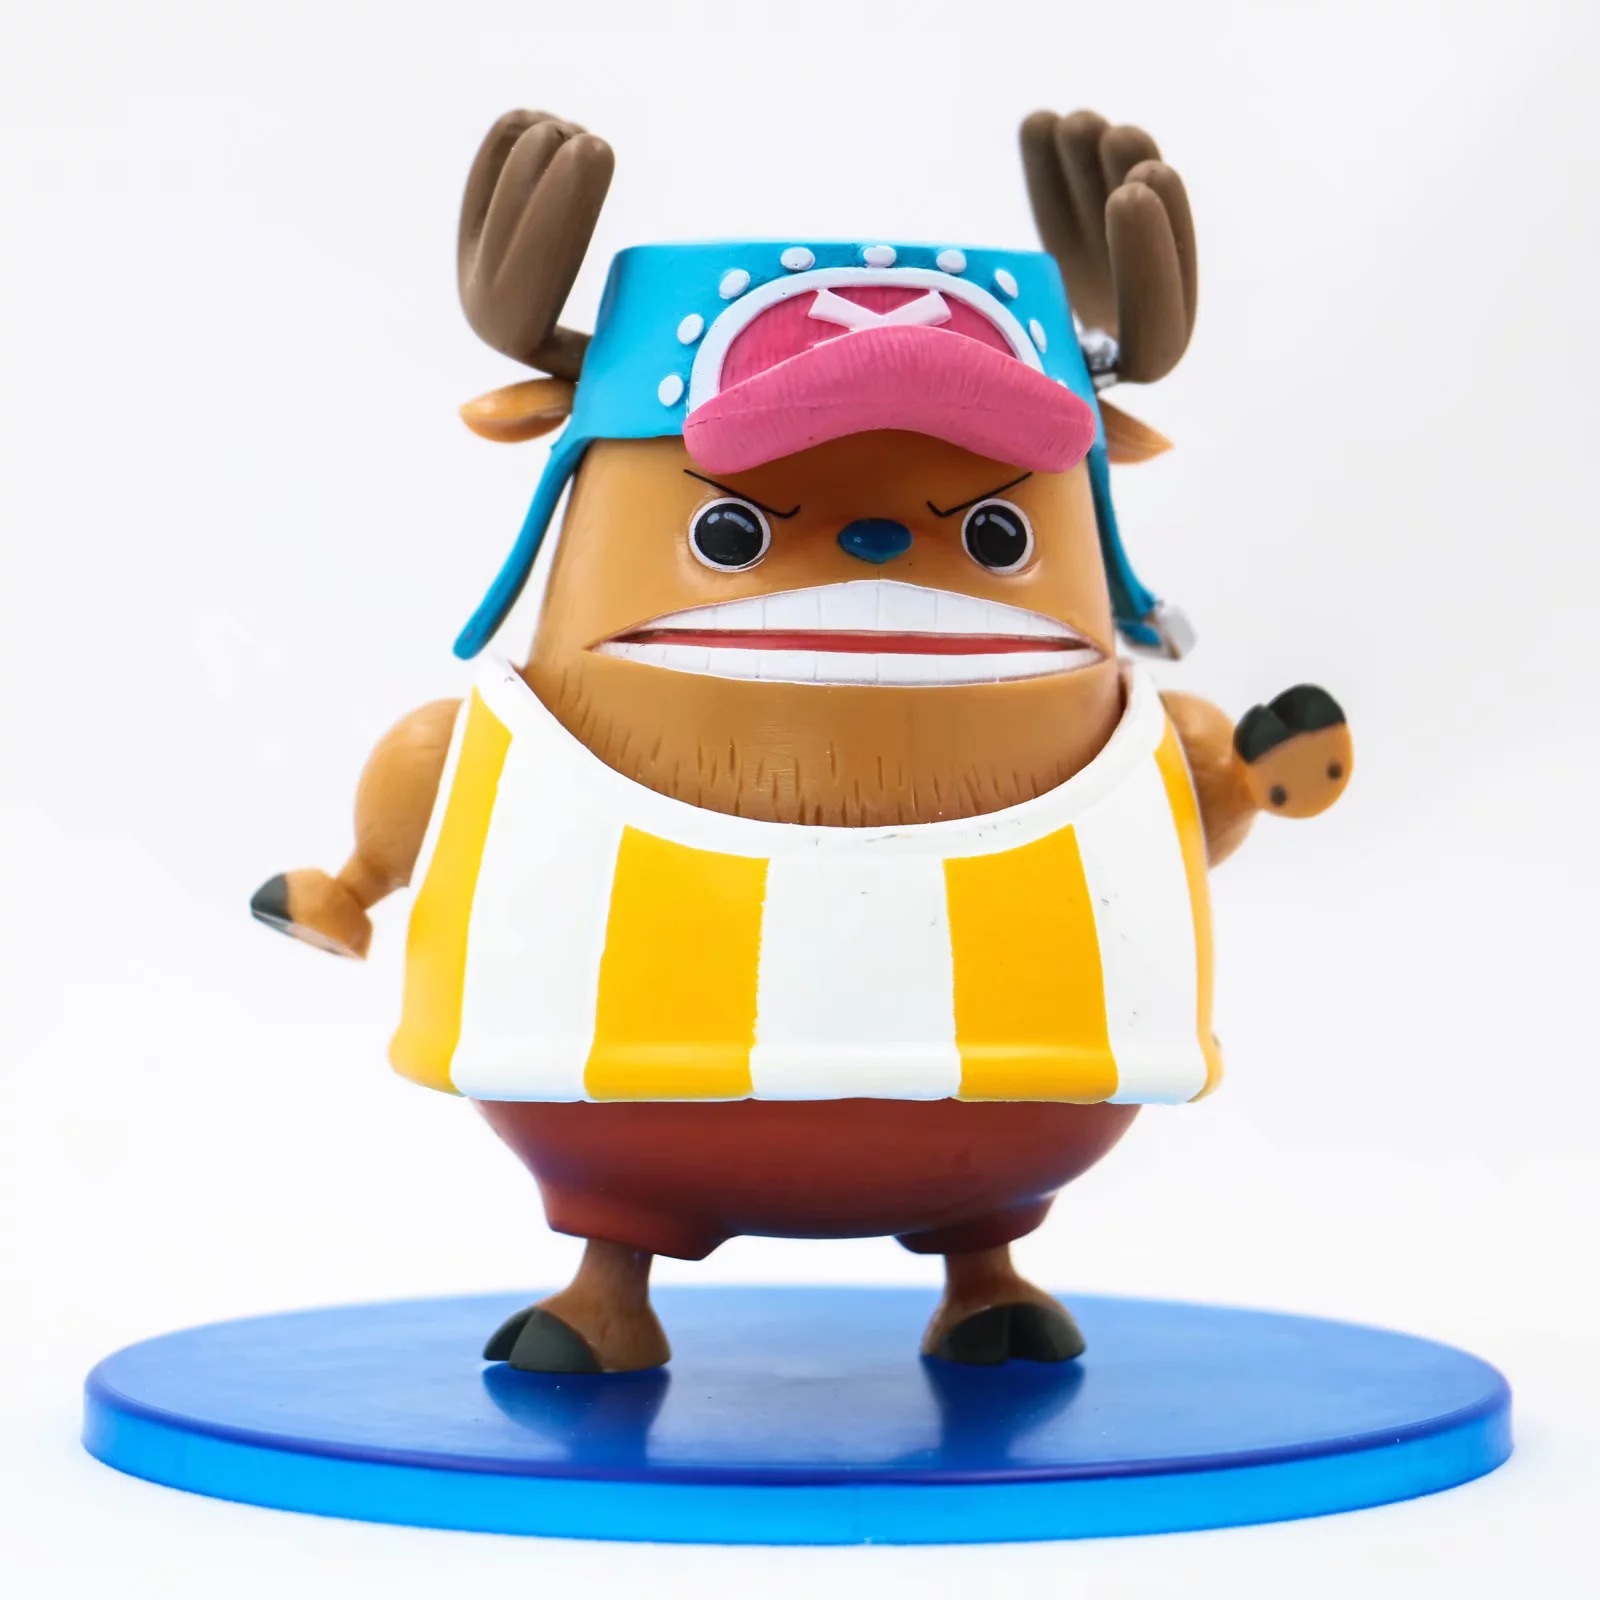 Anime One Piece Tony Tony Chopper Action Figure Toy Kung Fu Chopper Collection Figurine Model Ornaments Decor Toys Gift